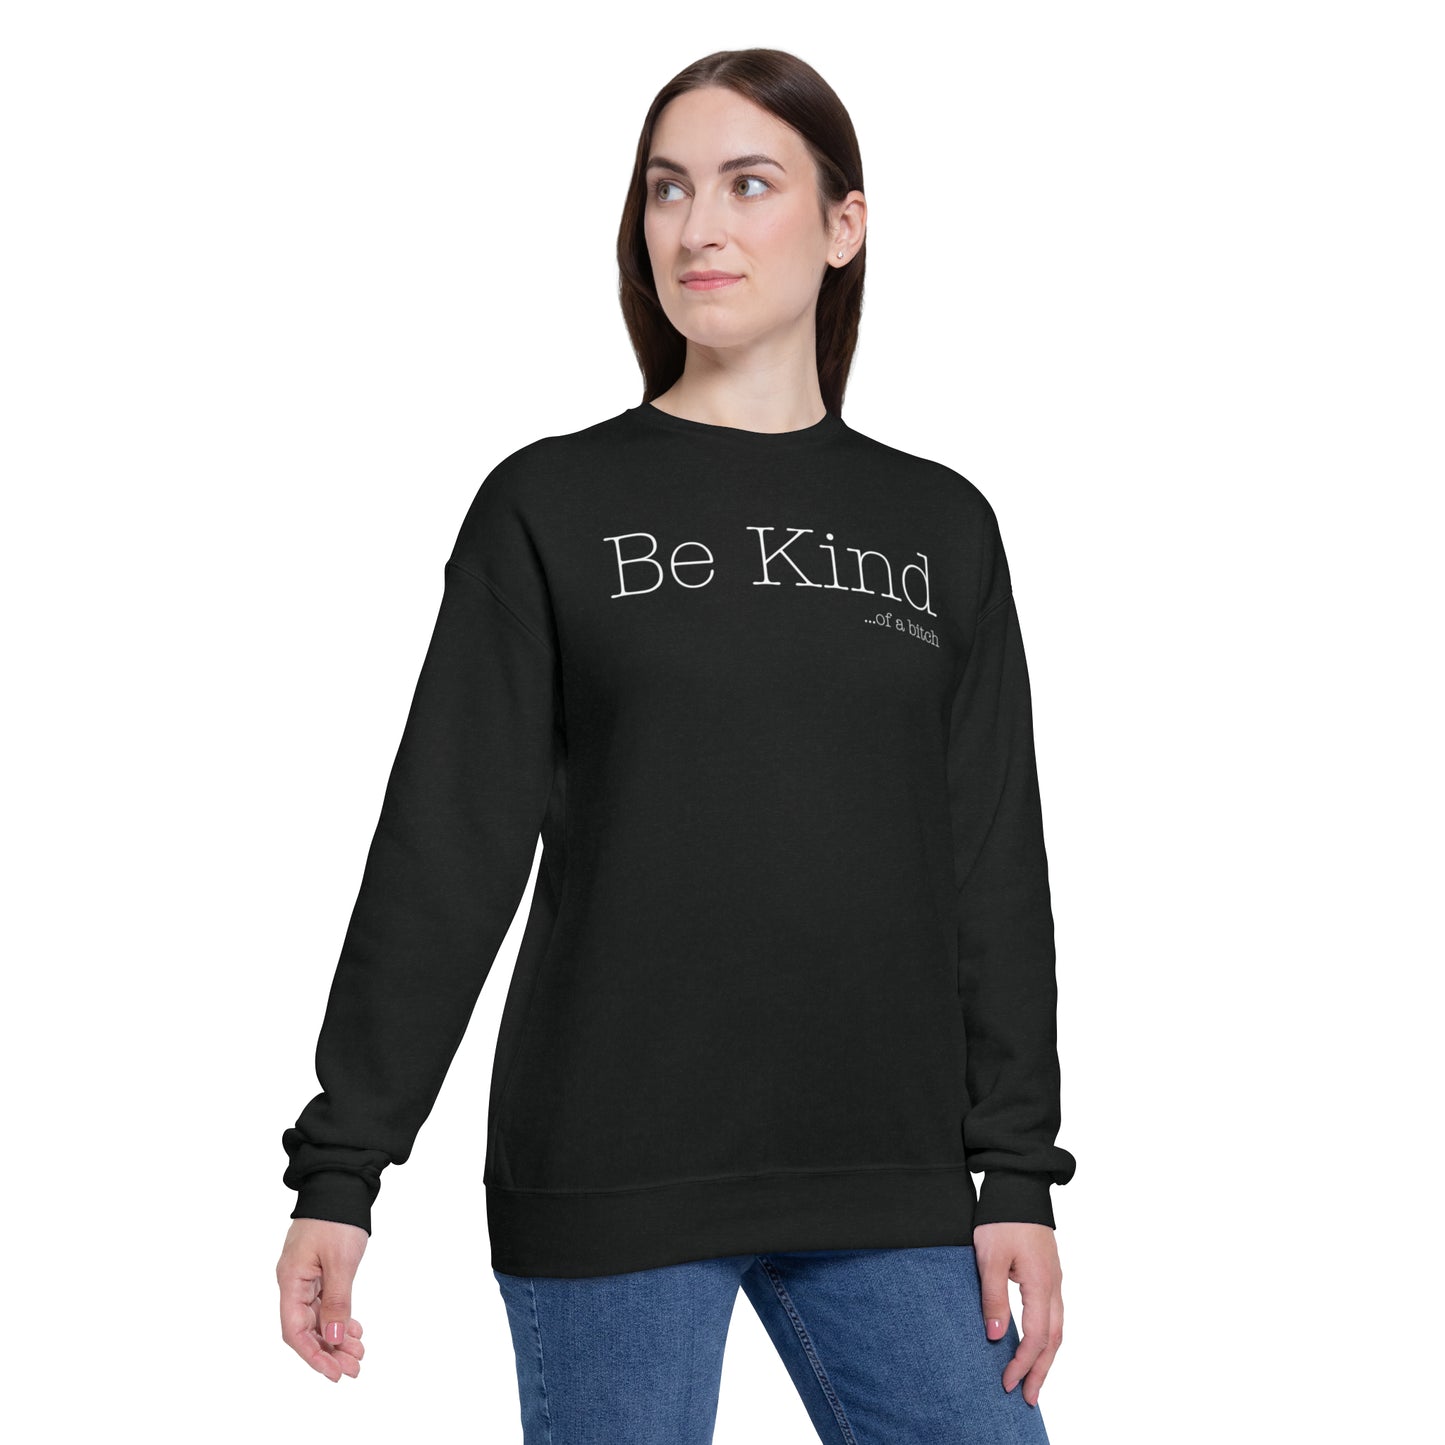 Be Kind...of a Bitch (White) Crewneck